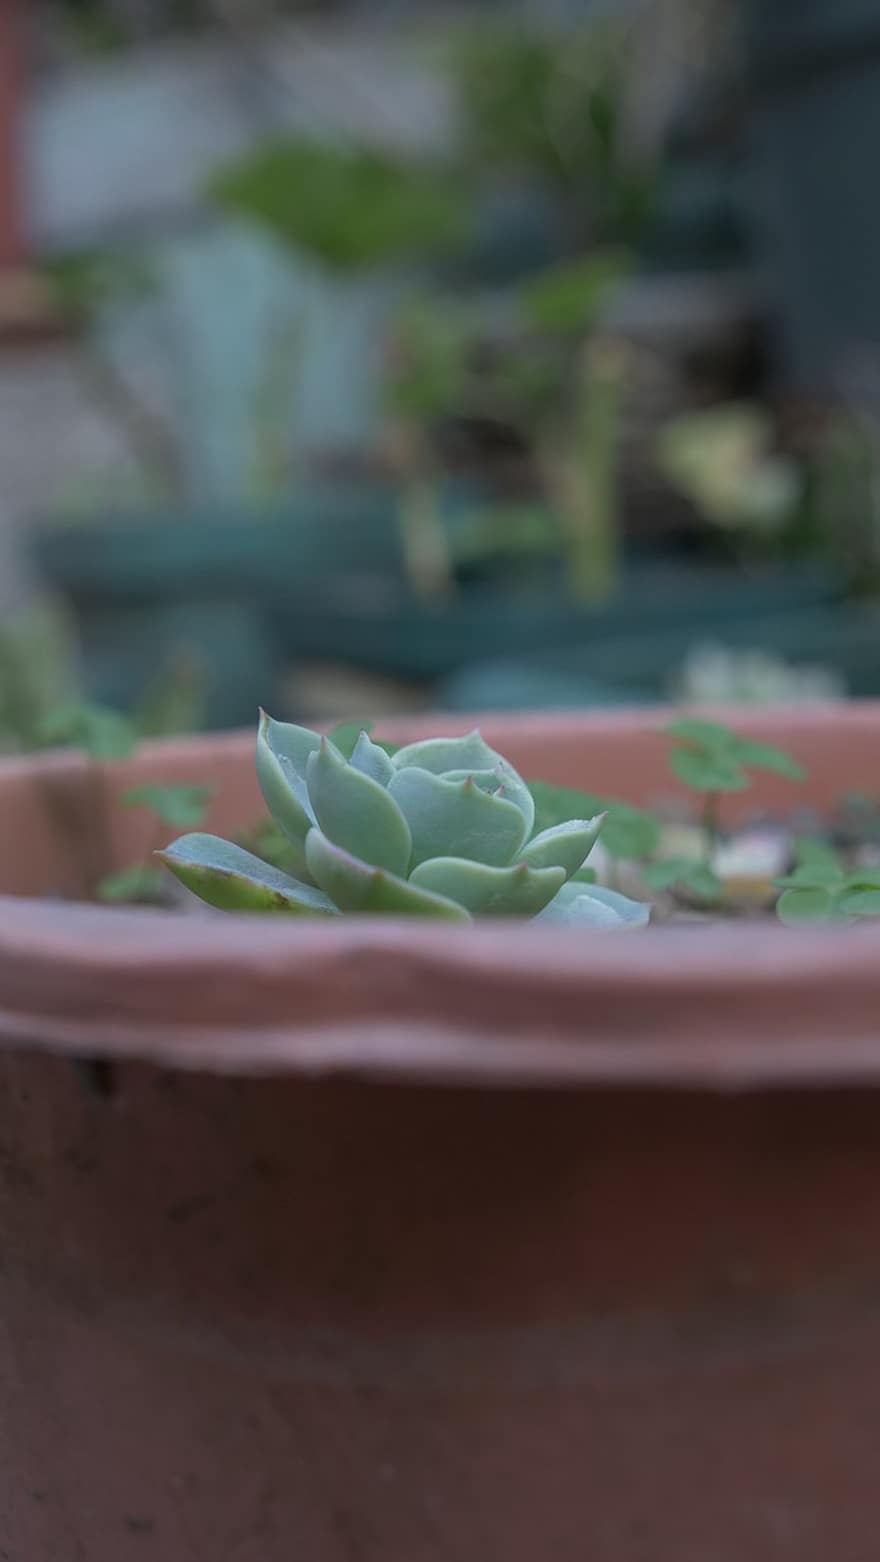 Nature, Succulent, Botany, Plany, Growth, Houseplant, Elegant Echeveria, plant, leaf, green color, close-up